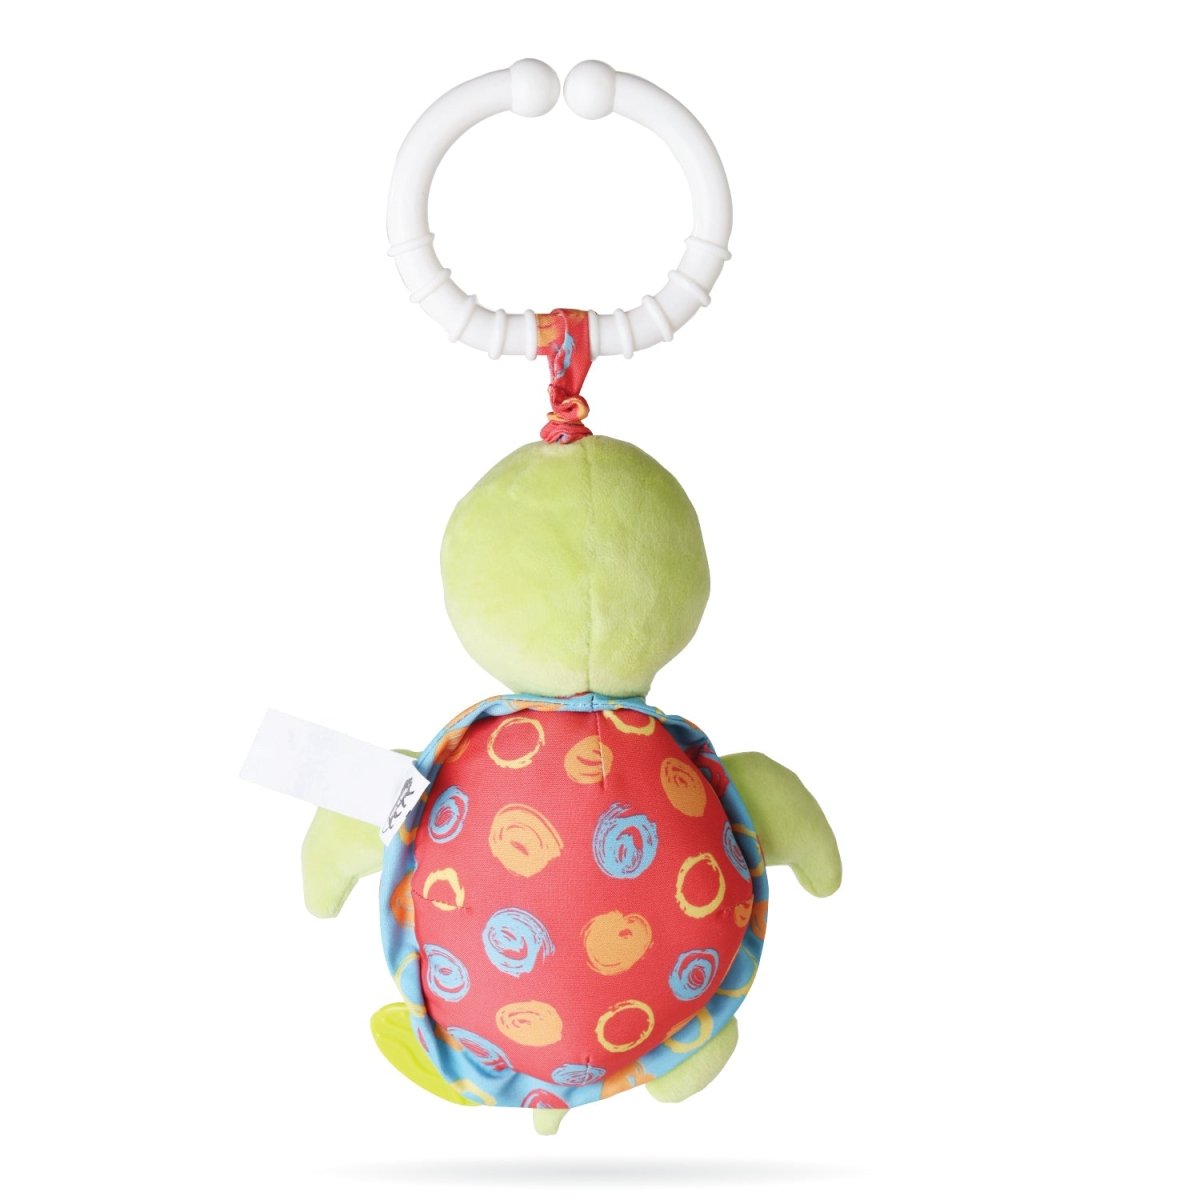 Nuluv Jittery Turtle- Rattle stroller toy - NU-I-0005